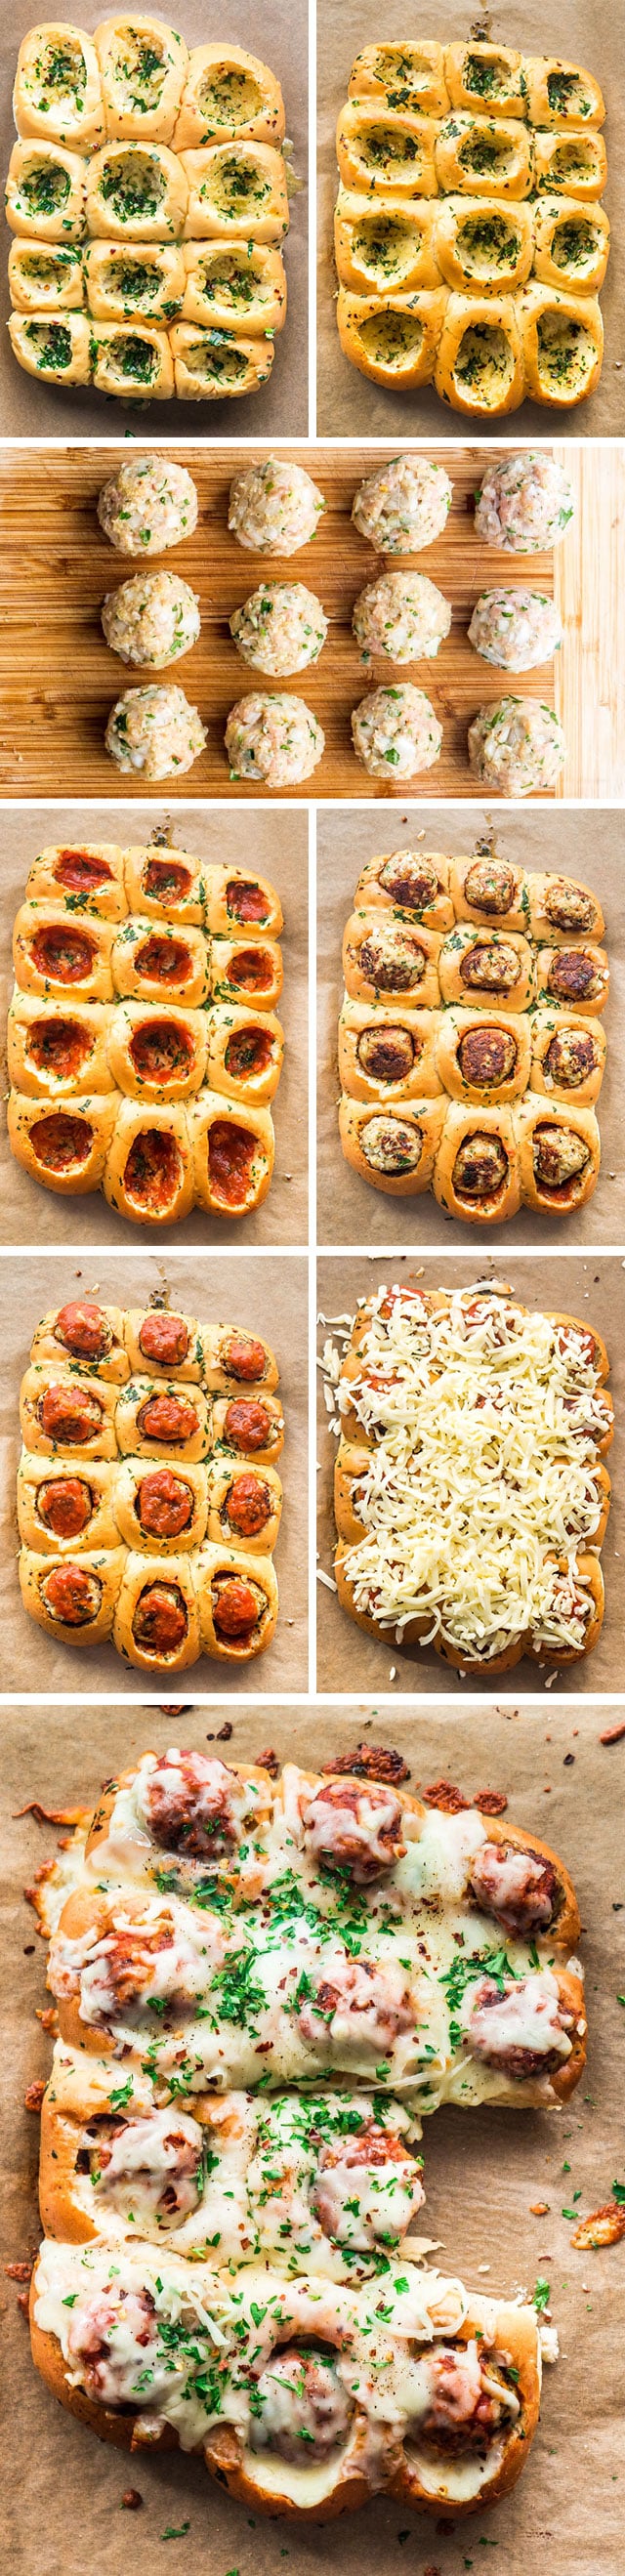 process shots showing how to make Cheesy Chicken Meatball Rolls